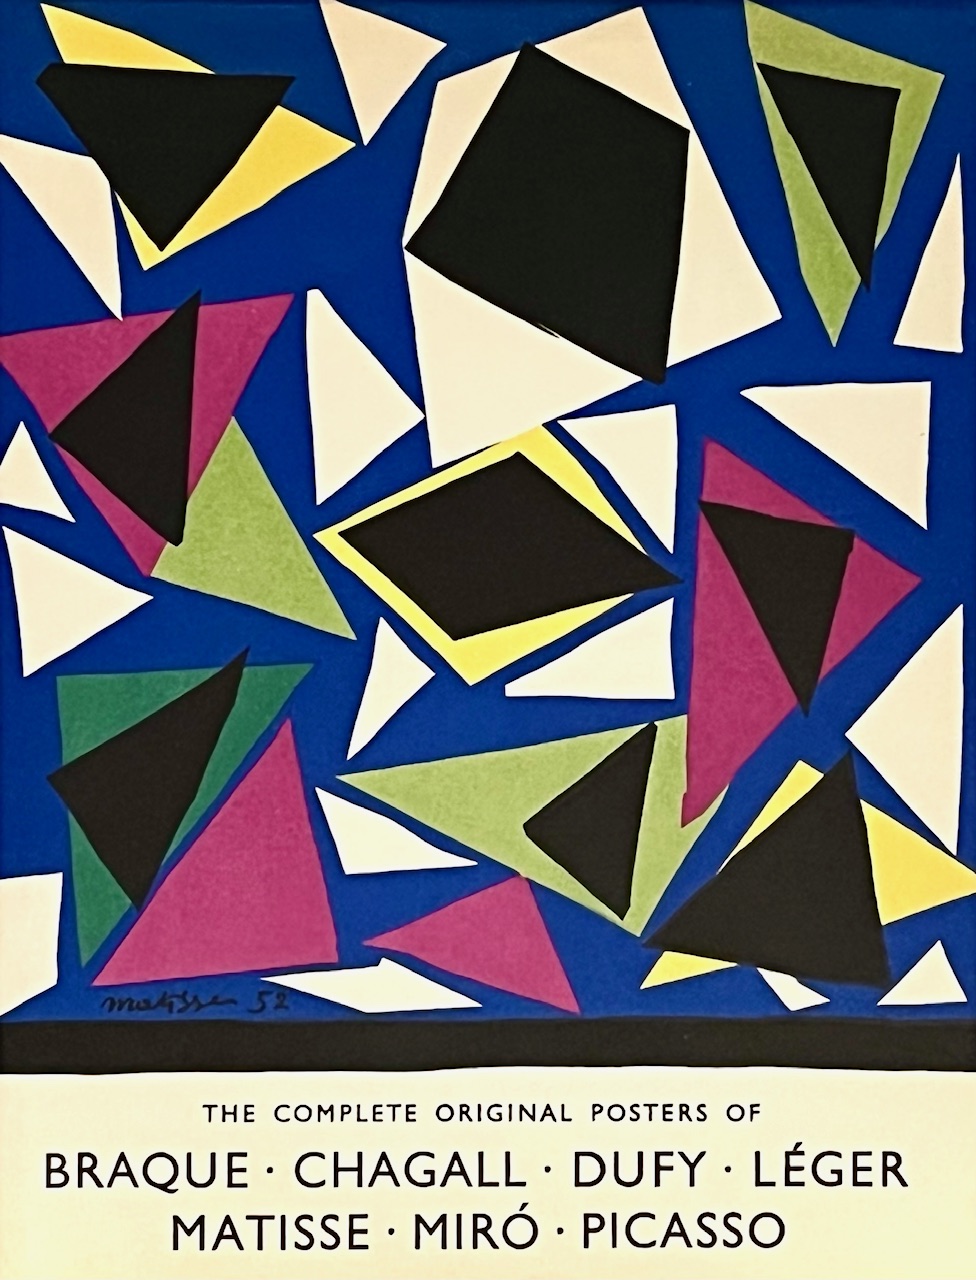 Henri Matisse lithograph cover Art in posters 1959